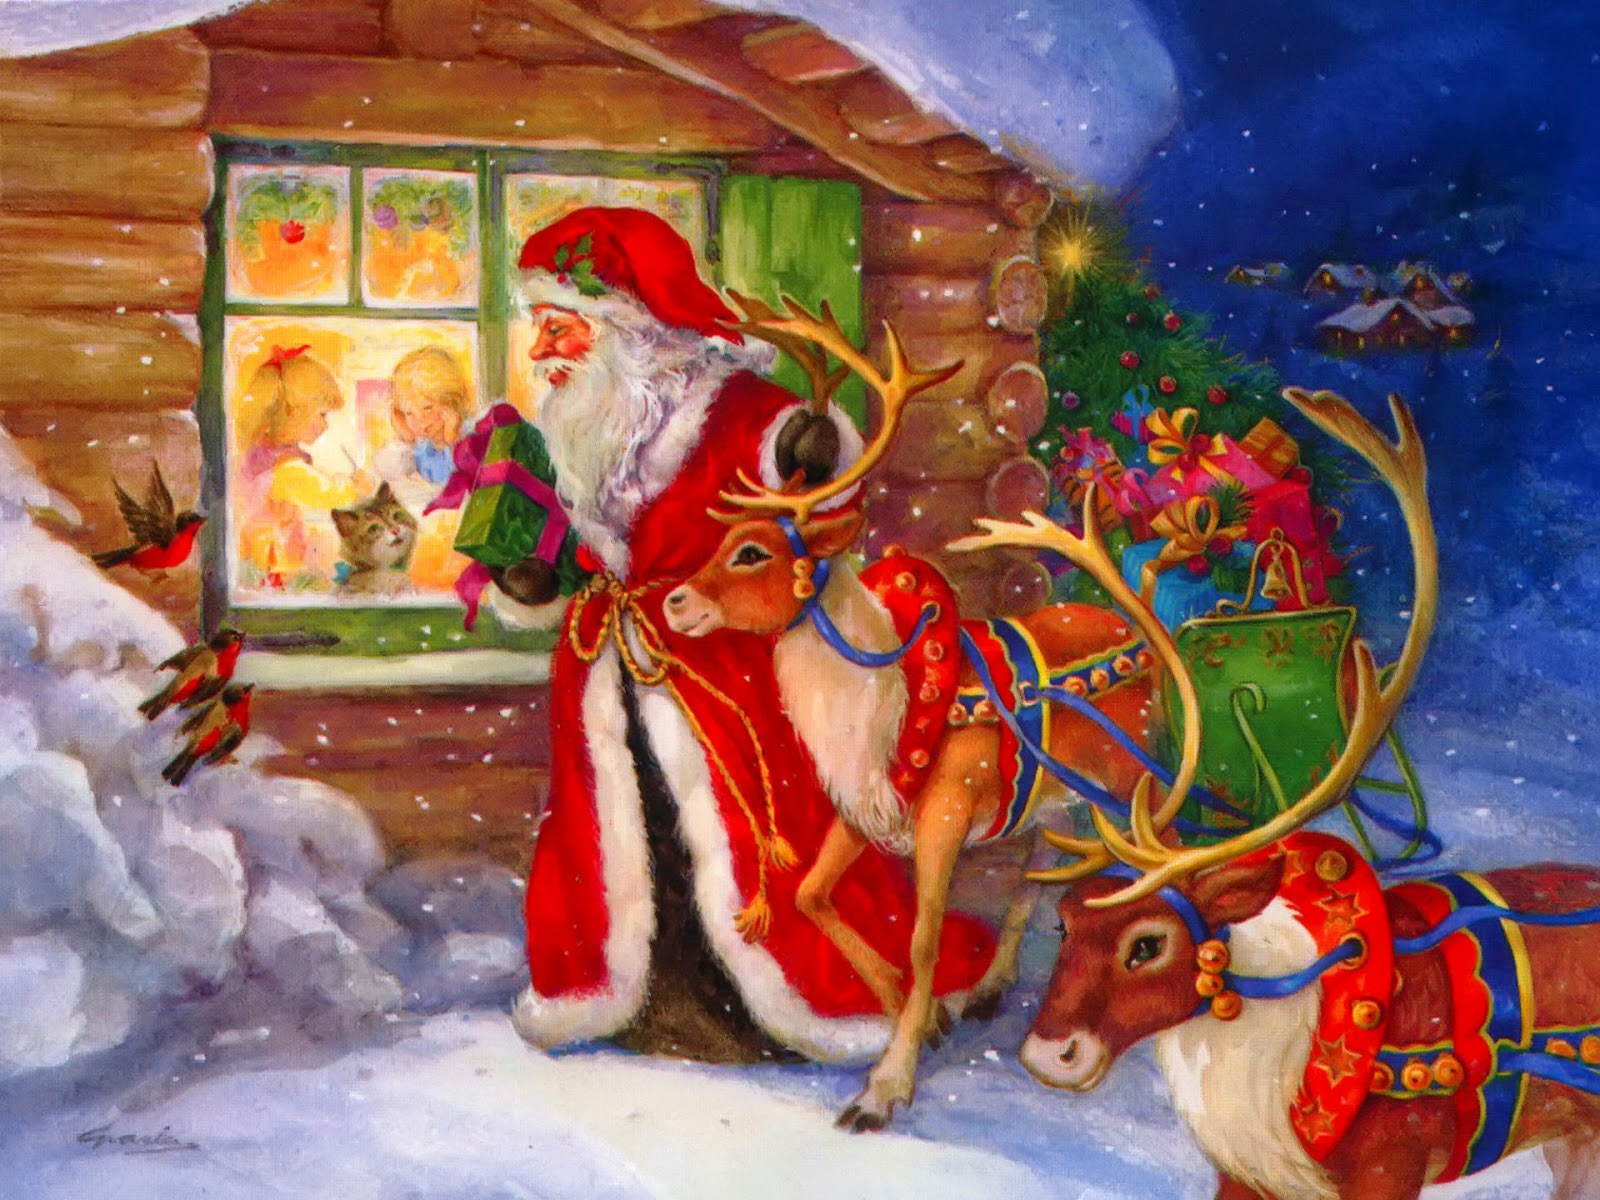 Santa-with-reindeer-watches-kids-through-window-tosecretly-place-gifts-cartoon-image.jpg